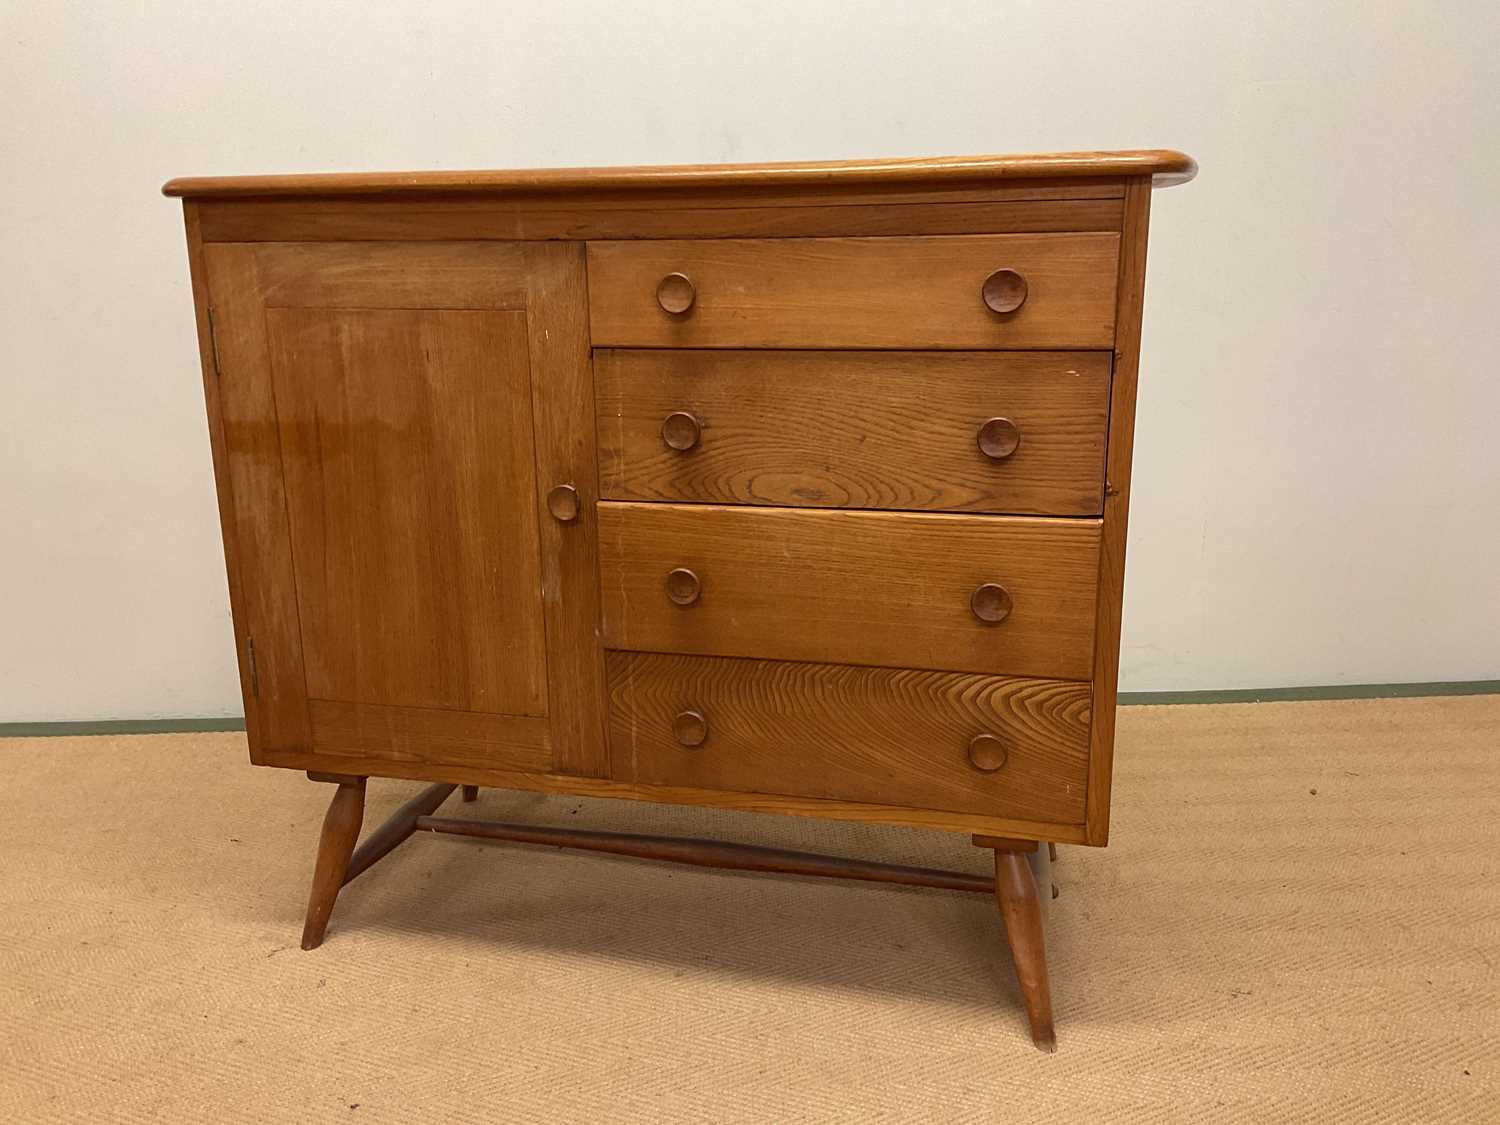 ERCOL; a mid century sideboard with four drawers including a cutlery drawer and a cupboard with